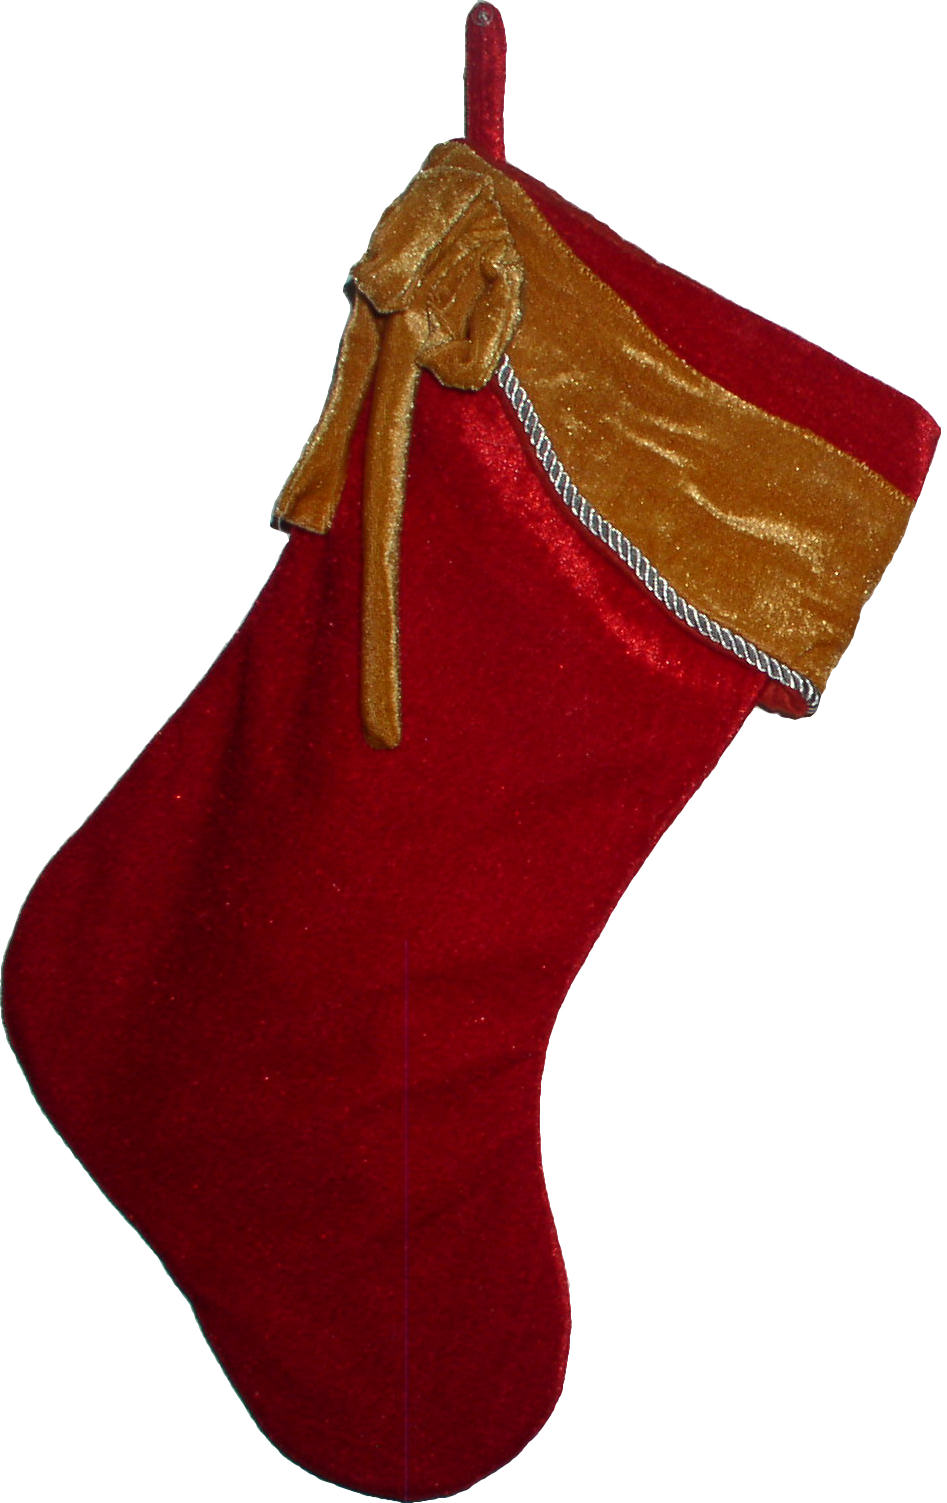 Why Personalized Christmas Stockings are a Good Idea | Christmas ...